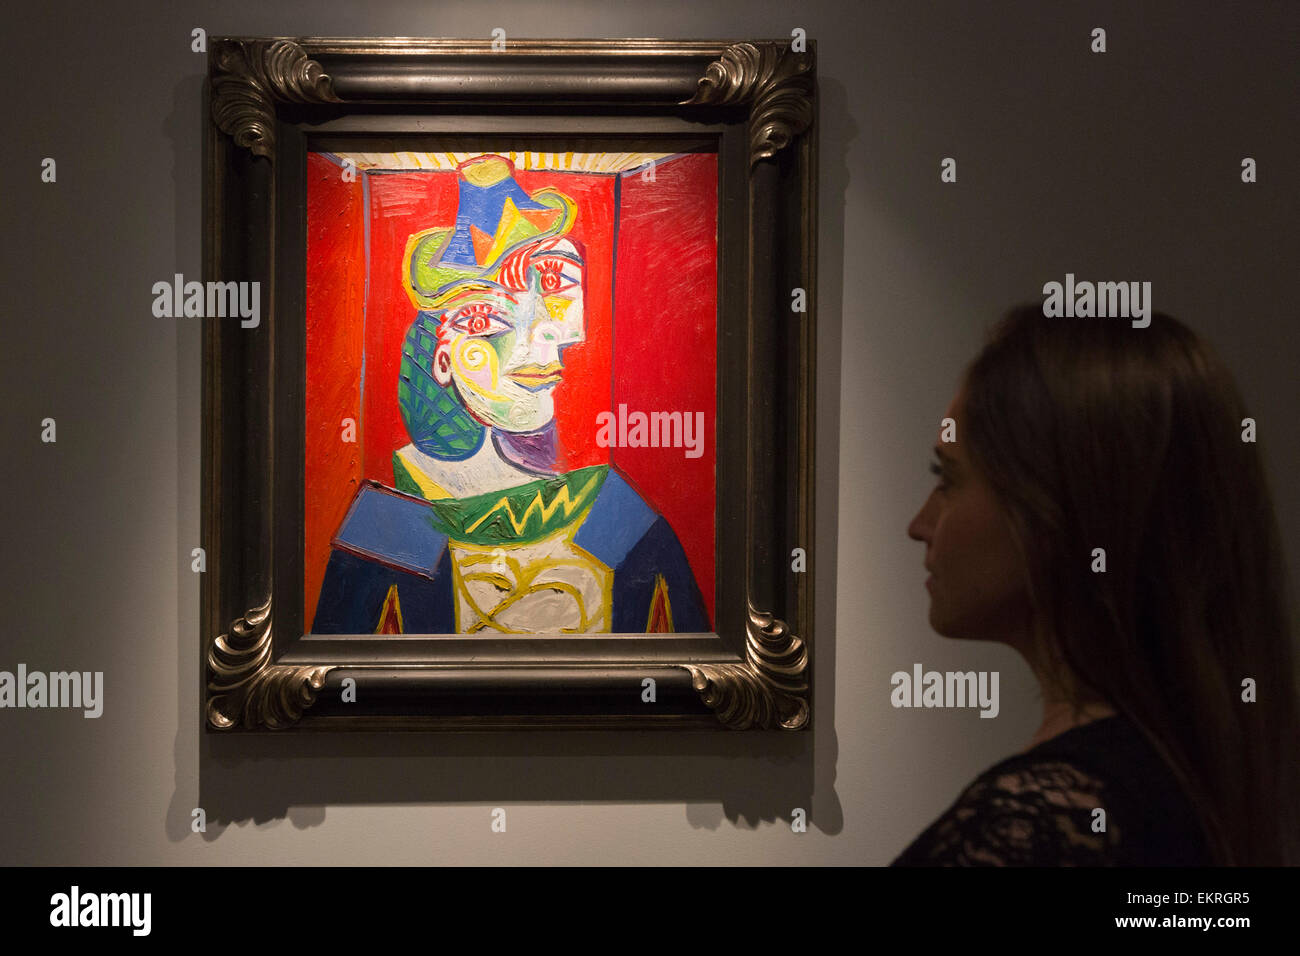 London, UK. 13 April 2015. A Christie's employee looks at the painting Pablo Picasso (1881-1973), Femme à la résille, 1938 (estimate in the region of US-$55 million). Christie's showcases a selection of almost fifty works from the spring sales in May in New York of Impressionist, Modern, Post-War And Contemporary Art. Most works will be on view to the public until 15 April at Christie’s King Street, London. Photo: ukartpics/Alamy Live News Stock Photo